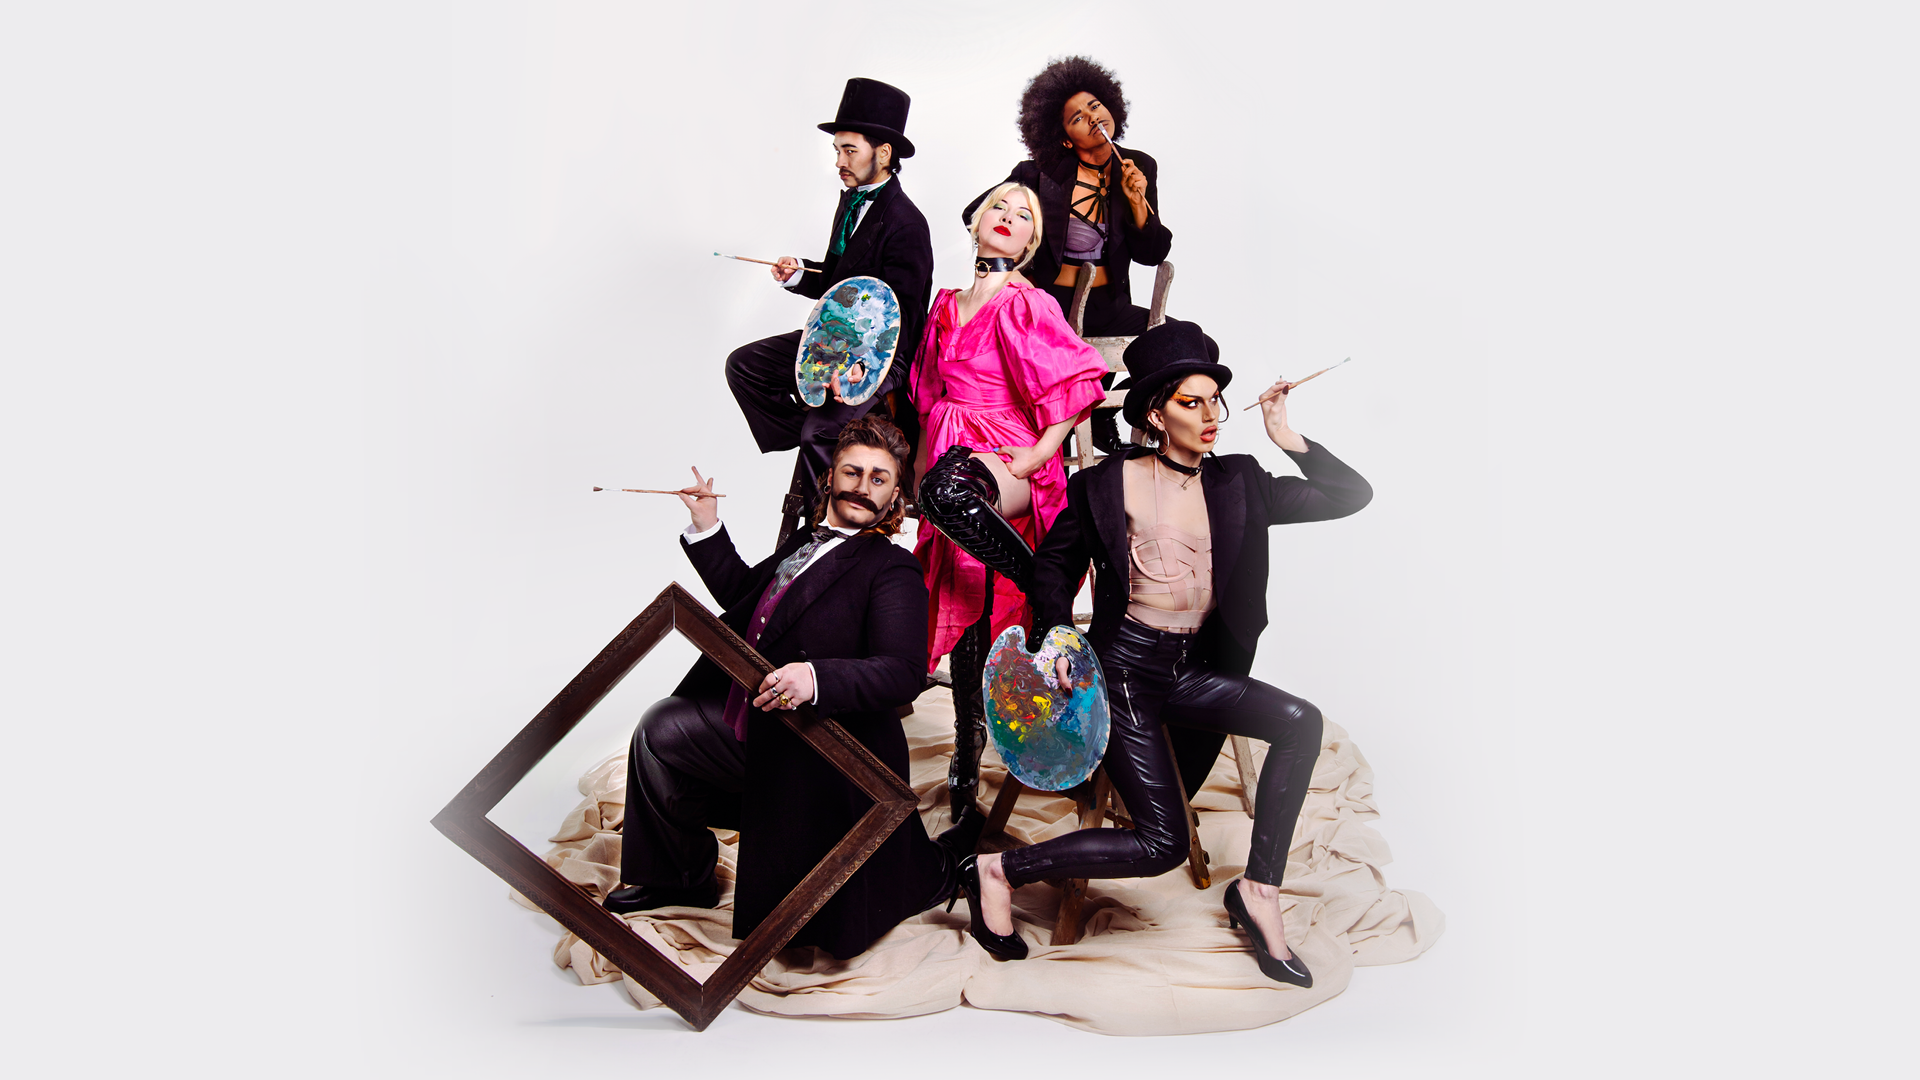 A woman in vivid pink Victorian dress stands confident and cocksure with her hand on her hip, surrounded by four drag kings in tail coats. Two of the drag kings wear top hats, another has Afro hair style and another a long flowing mullet. The four drag kings variously hold paintbrushes, an empty picture frame and messy paint palettes.